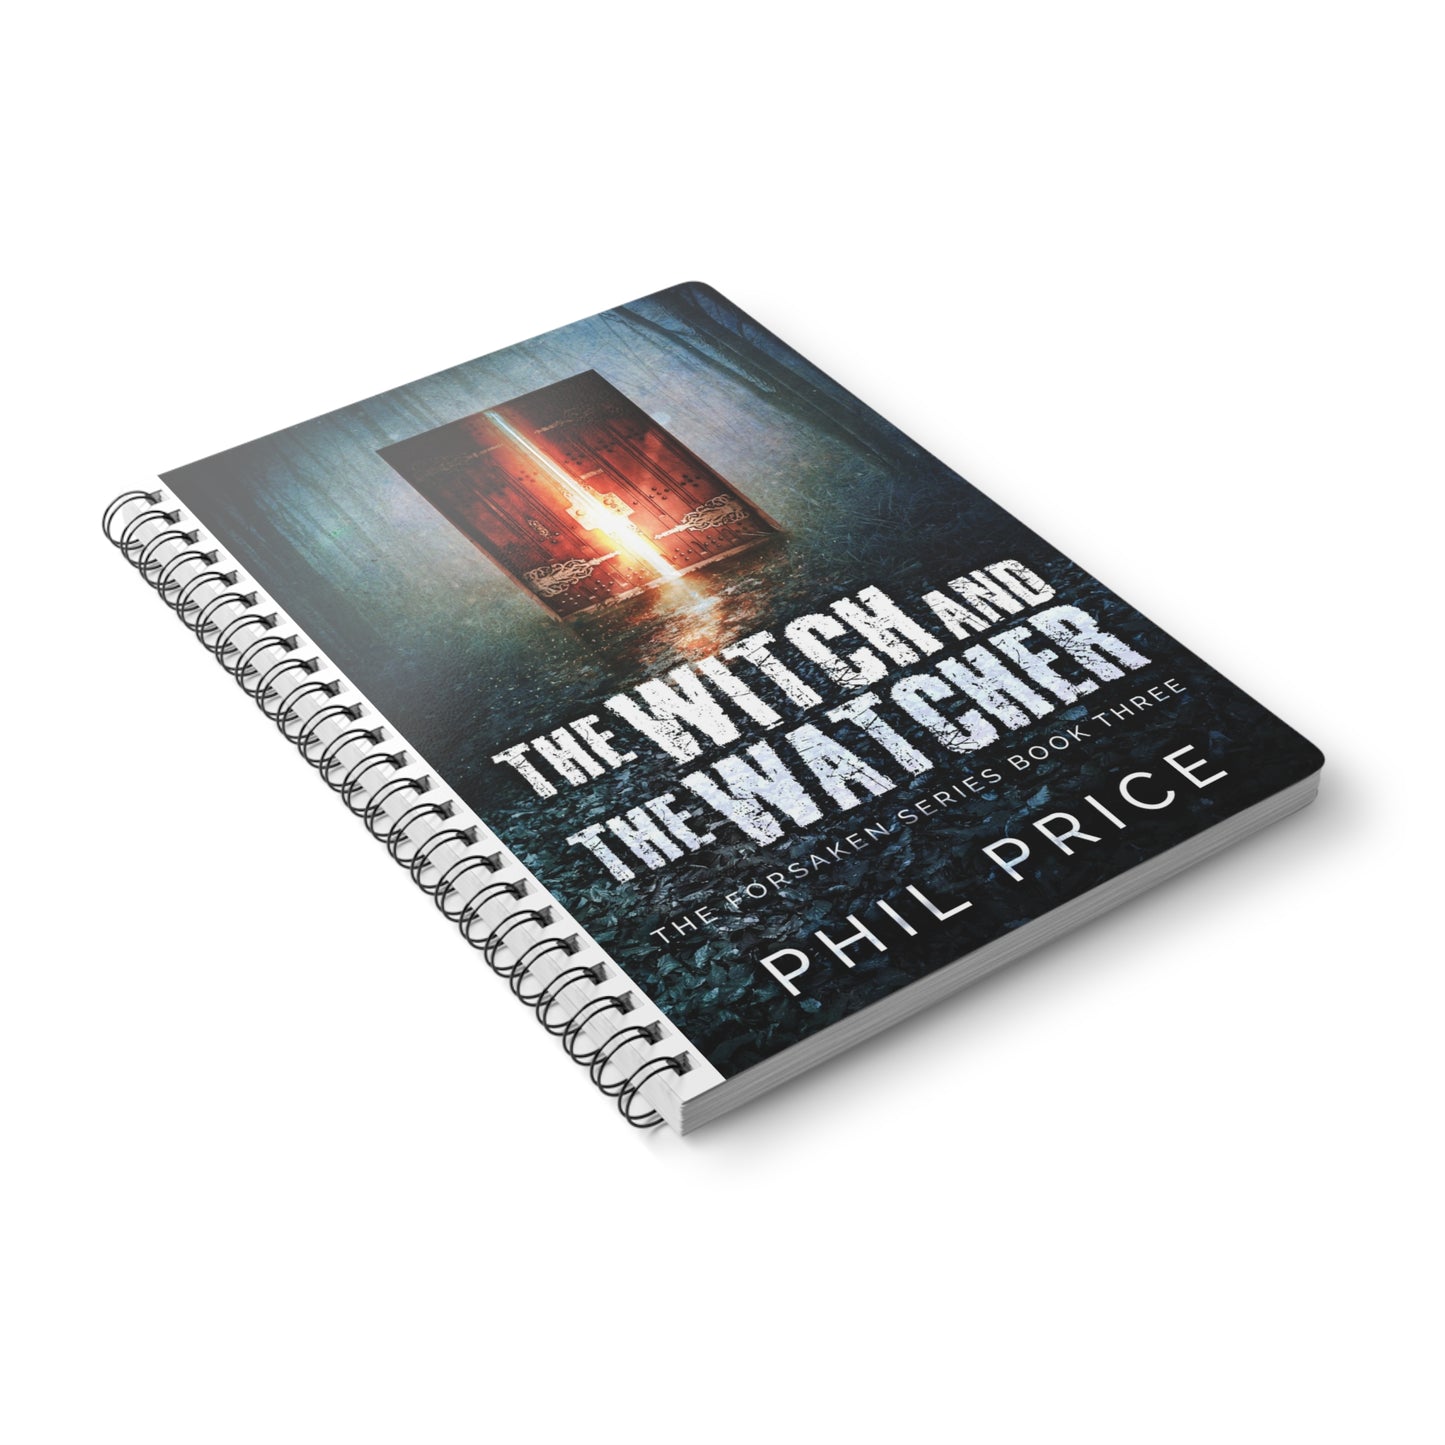 The Witch and the Watcher - A5 Wirebound Notebook